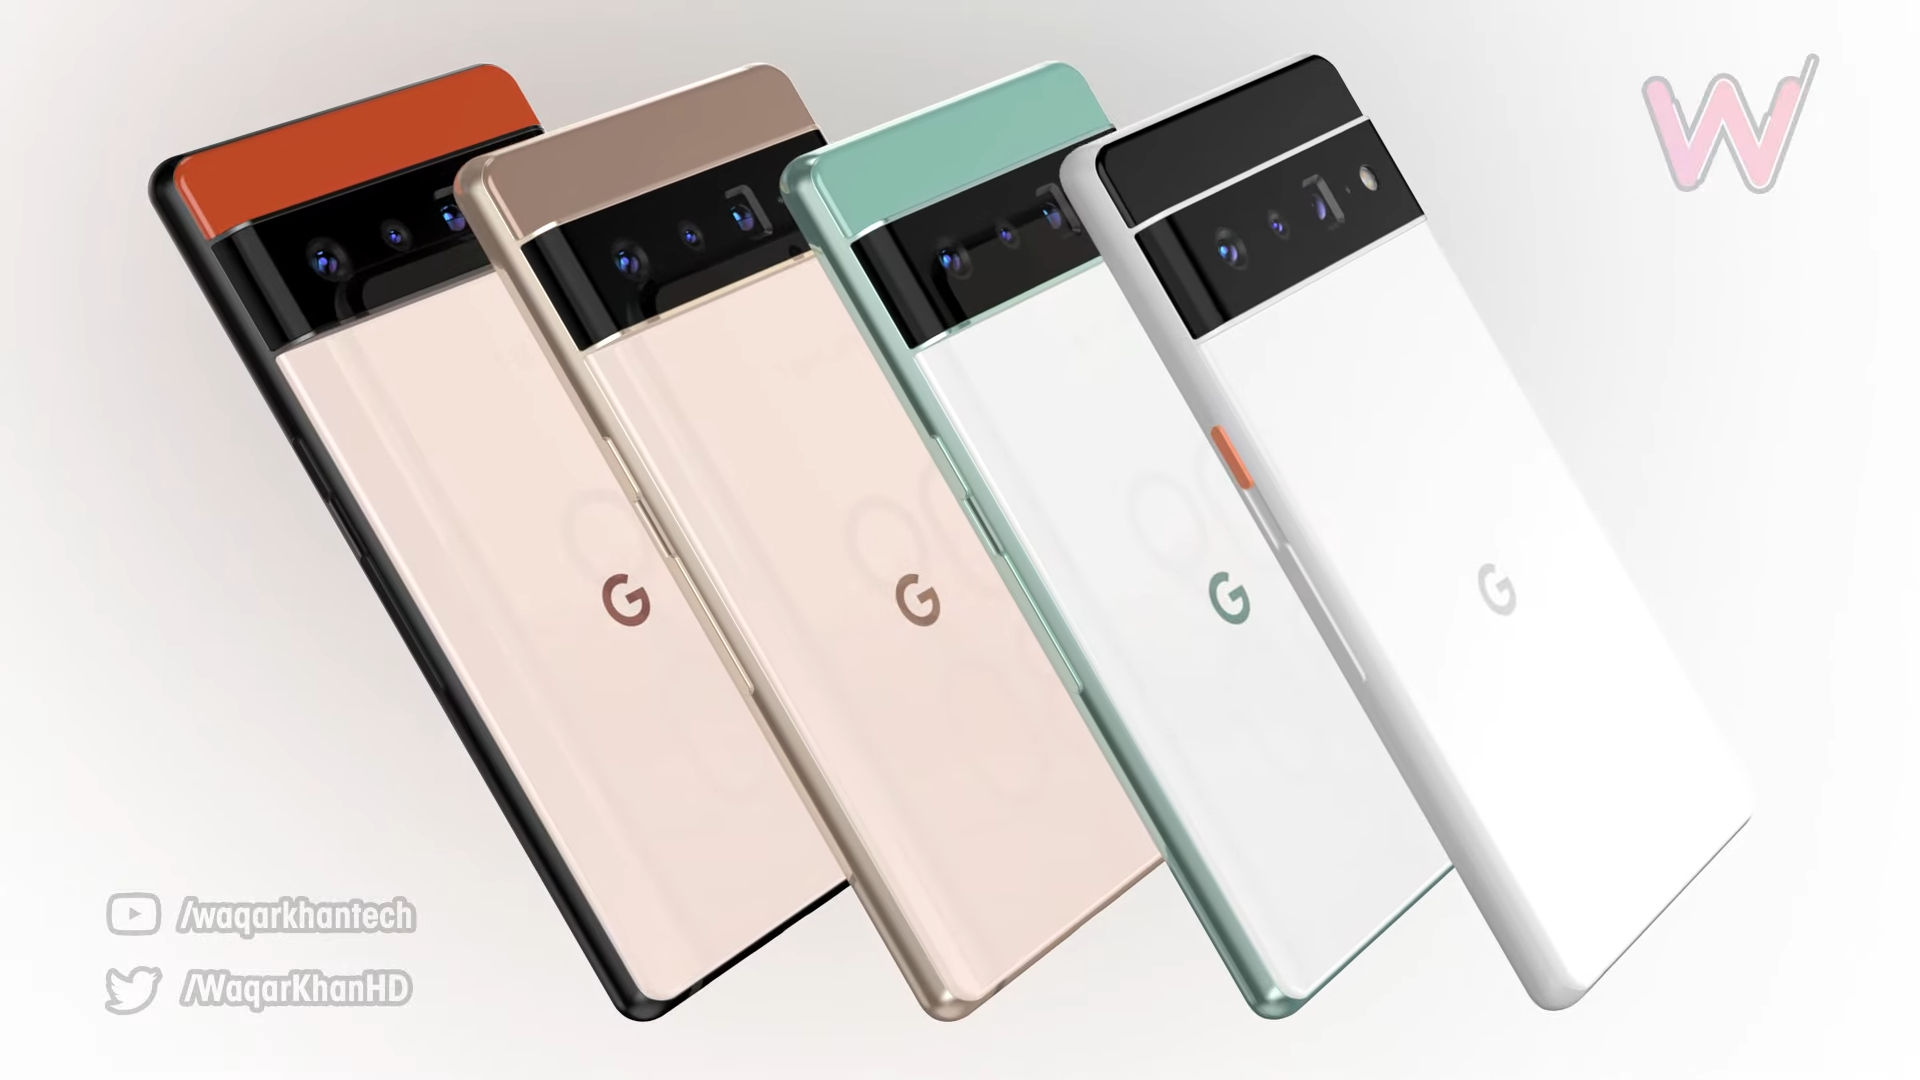 The Google Pixel 6 camera stripe can become a rich design playground - Can Google finally kill tired camera islands with the Pixel 6?